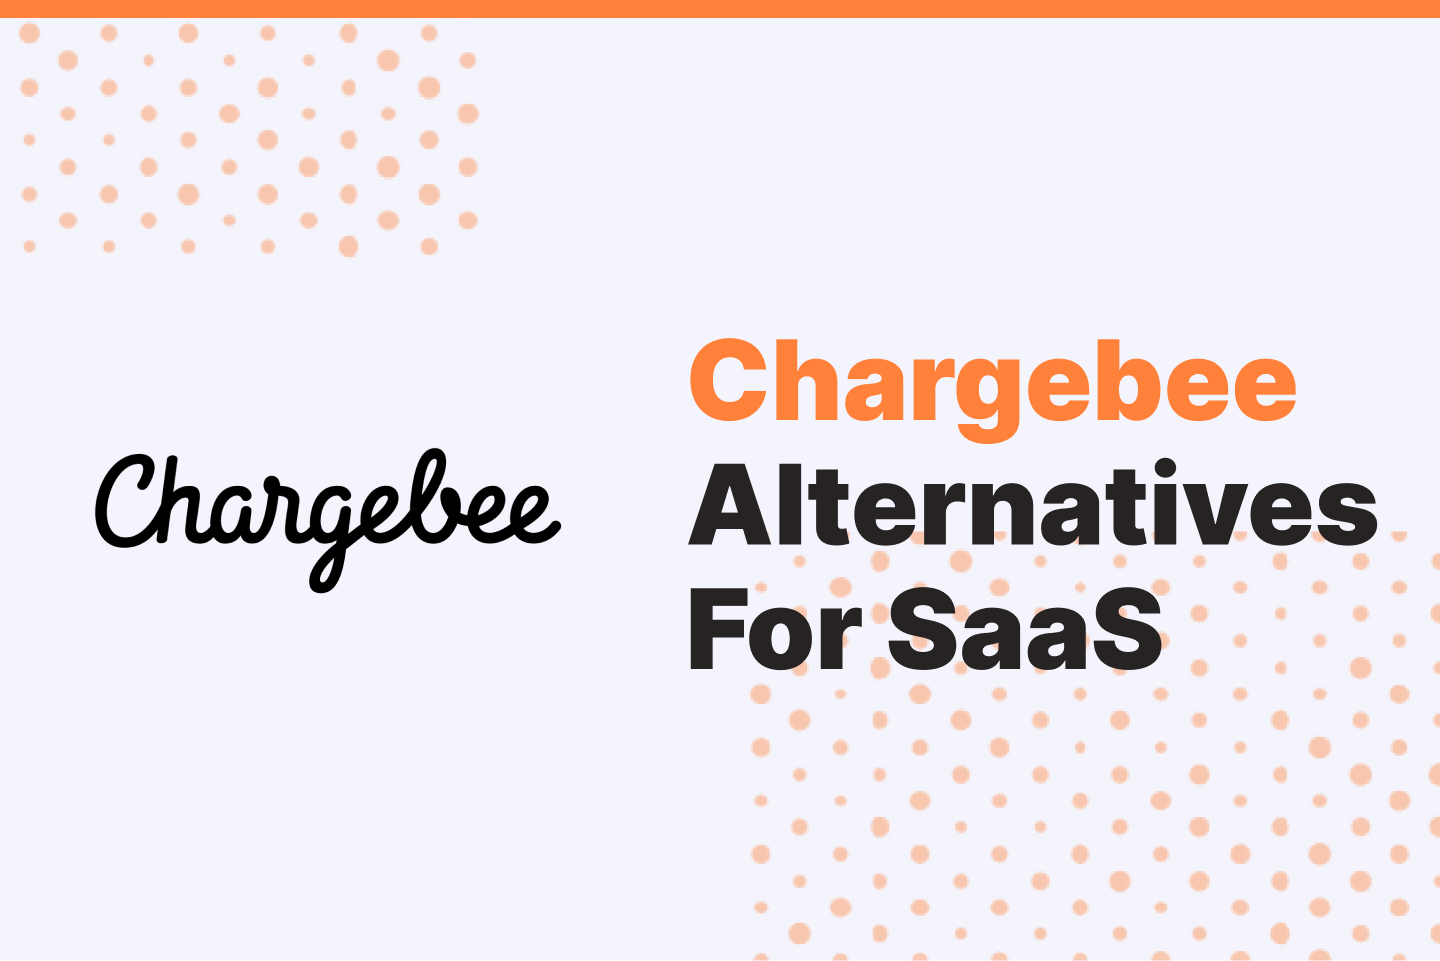 8 Chargebee Alternatives That Might Be A Better Choice